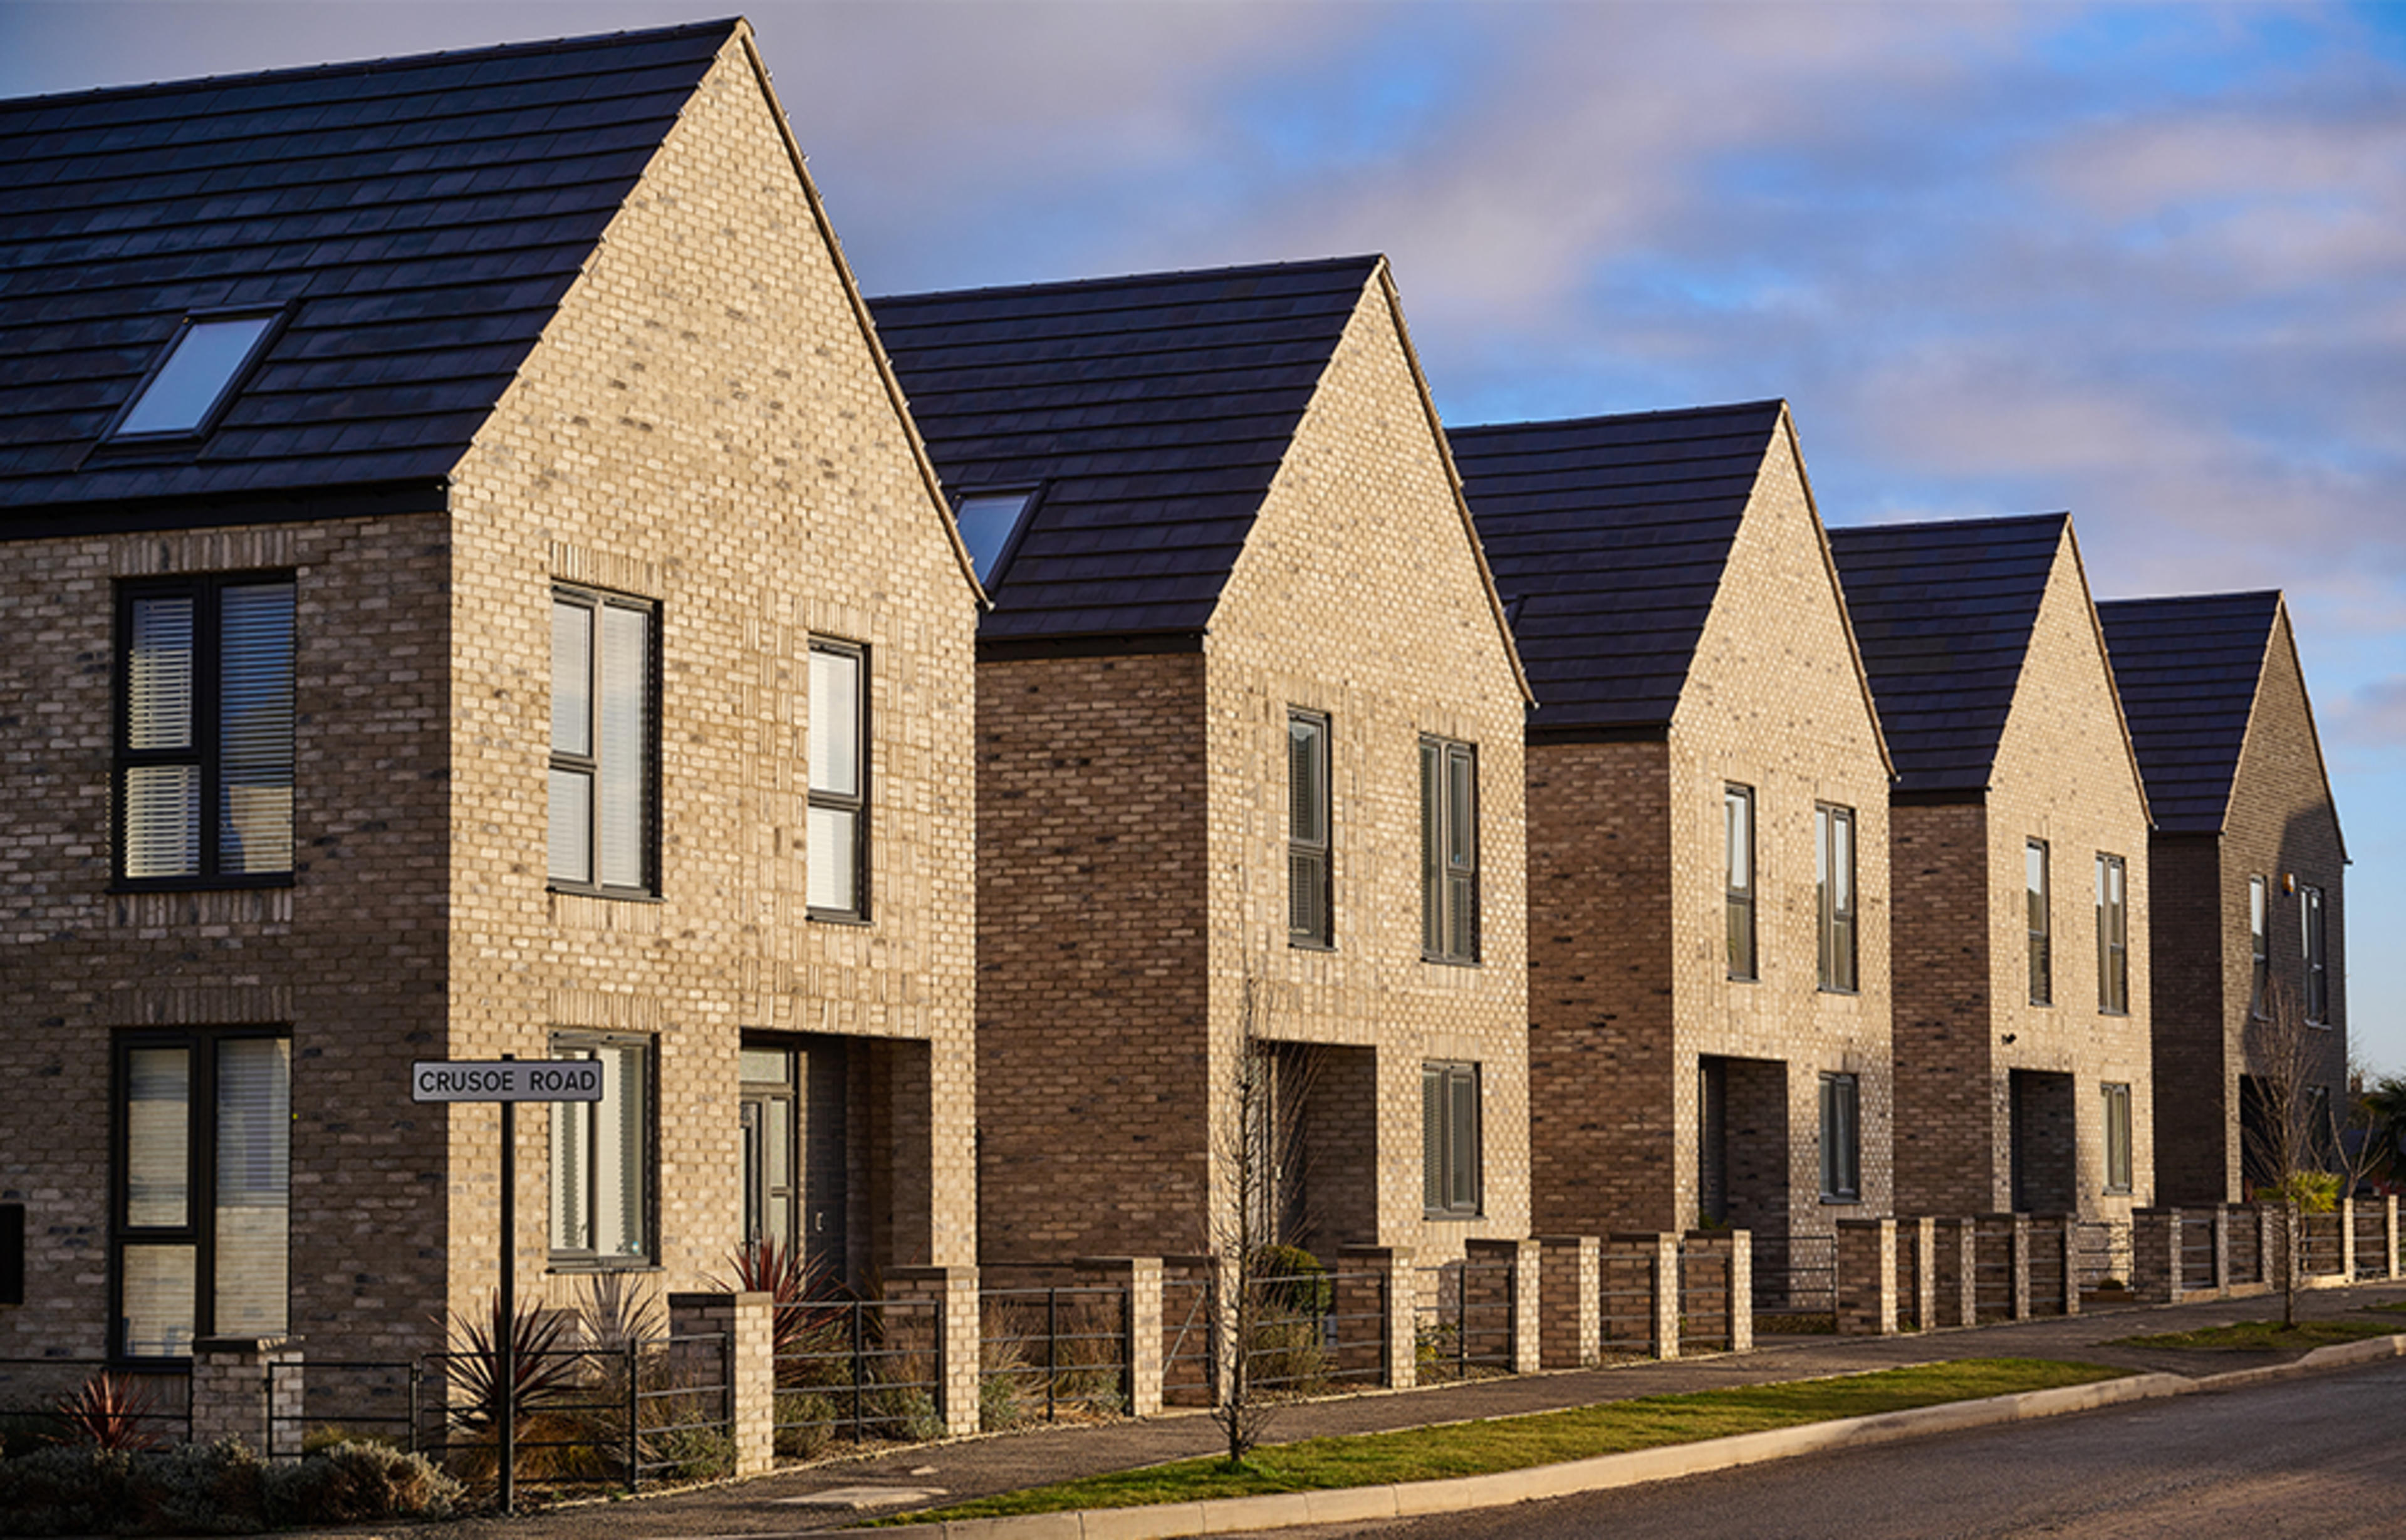 External image of detached homes at Meaux Rise